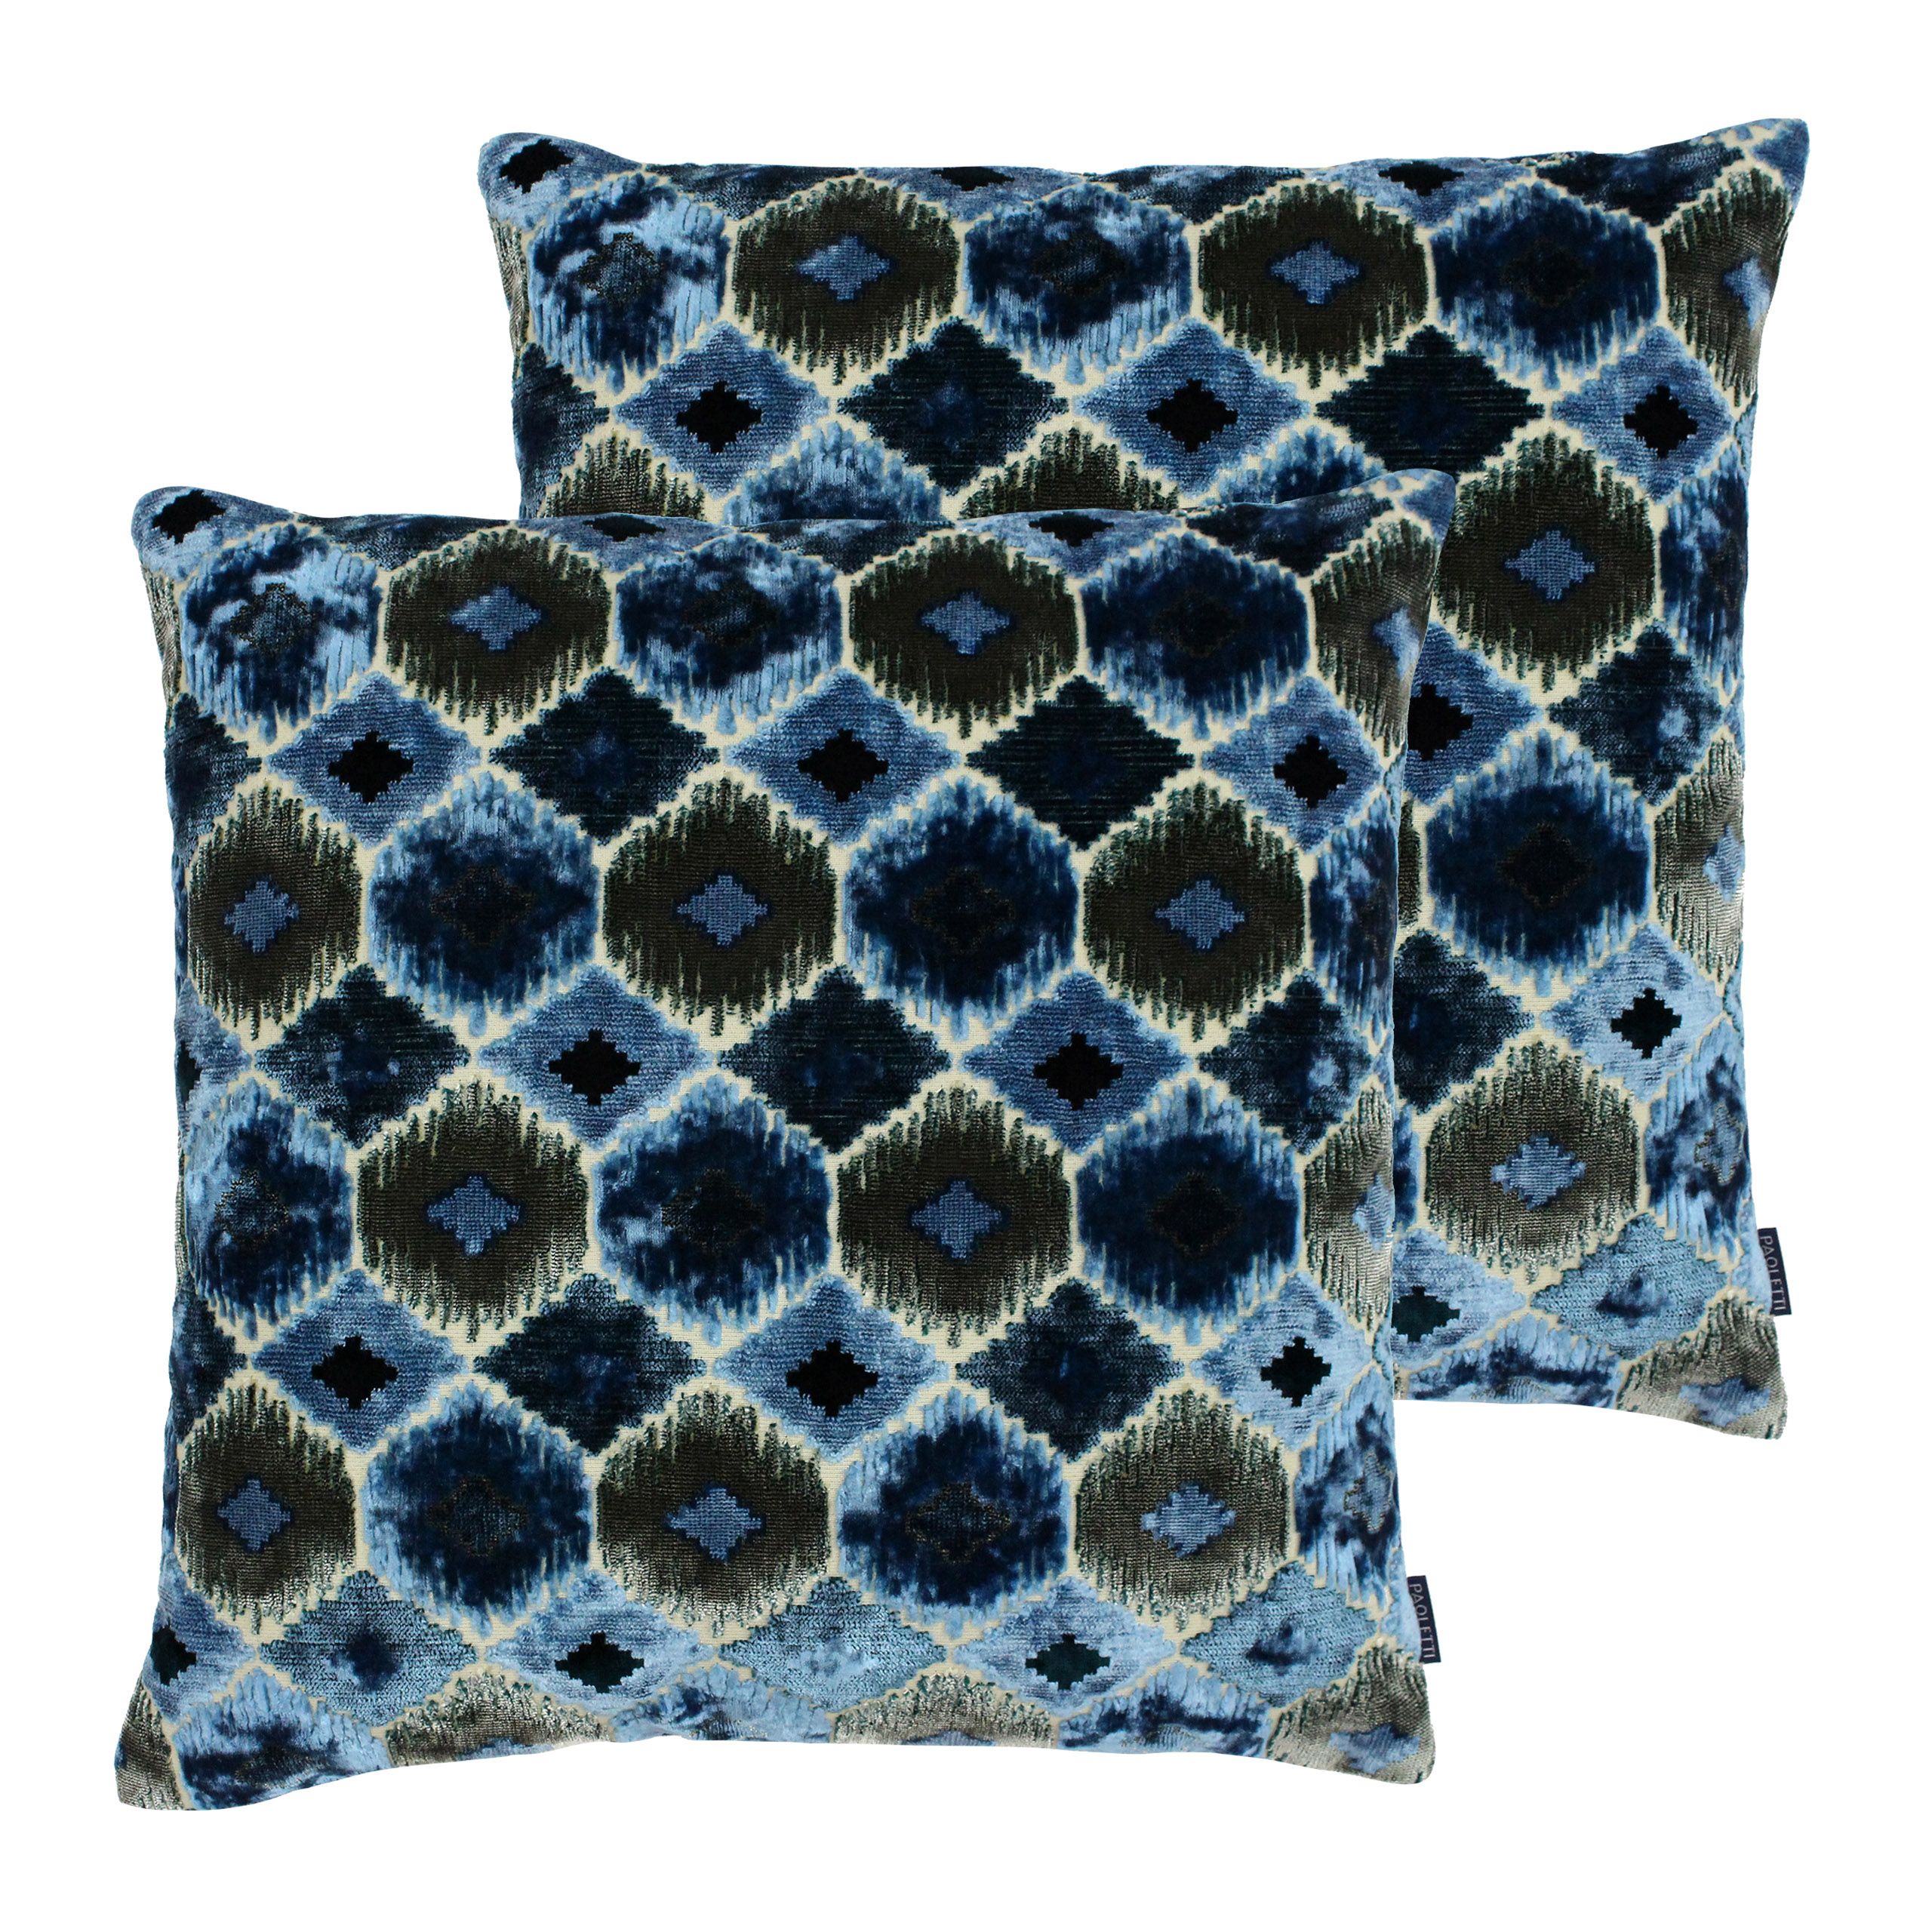 Bringing bold patterns and untamed potential to the table, the Paoletti Ares cushion is a striking choice not for the faint of heart. This distinct cushion features a modern Ikat print of a tribal geometric design. The shimmering thread and textured jacquard weave gives this cushion a unique look and provides a modern take on a global inspired design. Each larger-than-average cushions would work well as an eye-catching piece and with its soft knife edges it will be ideal for sofas and beds. Made with 68% hard-wearing polyester and 32% lustrous viscose you'll find this cushion irresistible to hold. To keep it looking bold and beautiful dry clean this cushion only. Use a cool iron when necessary for the best results.